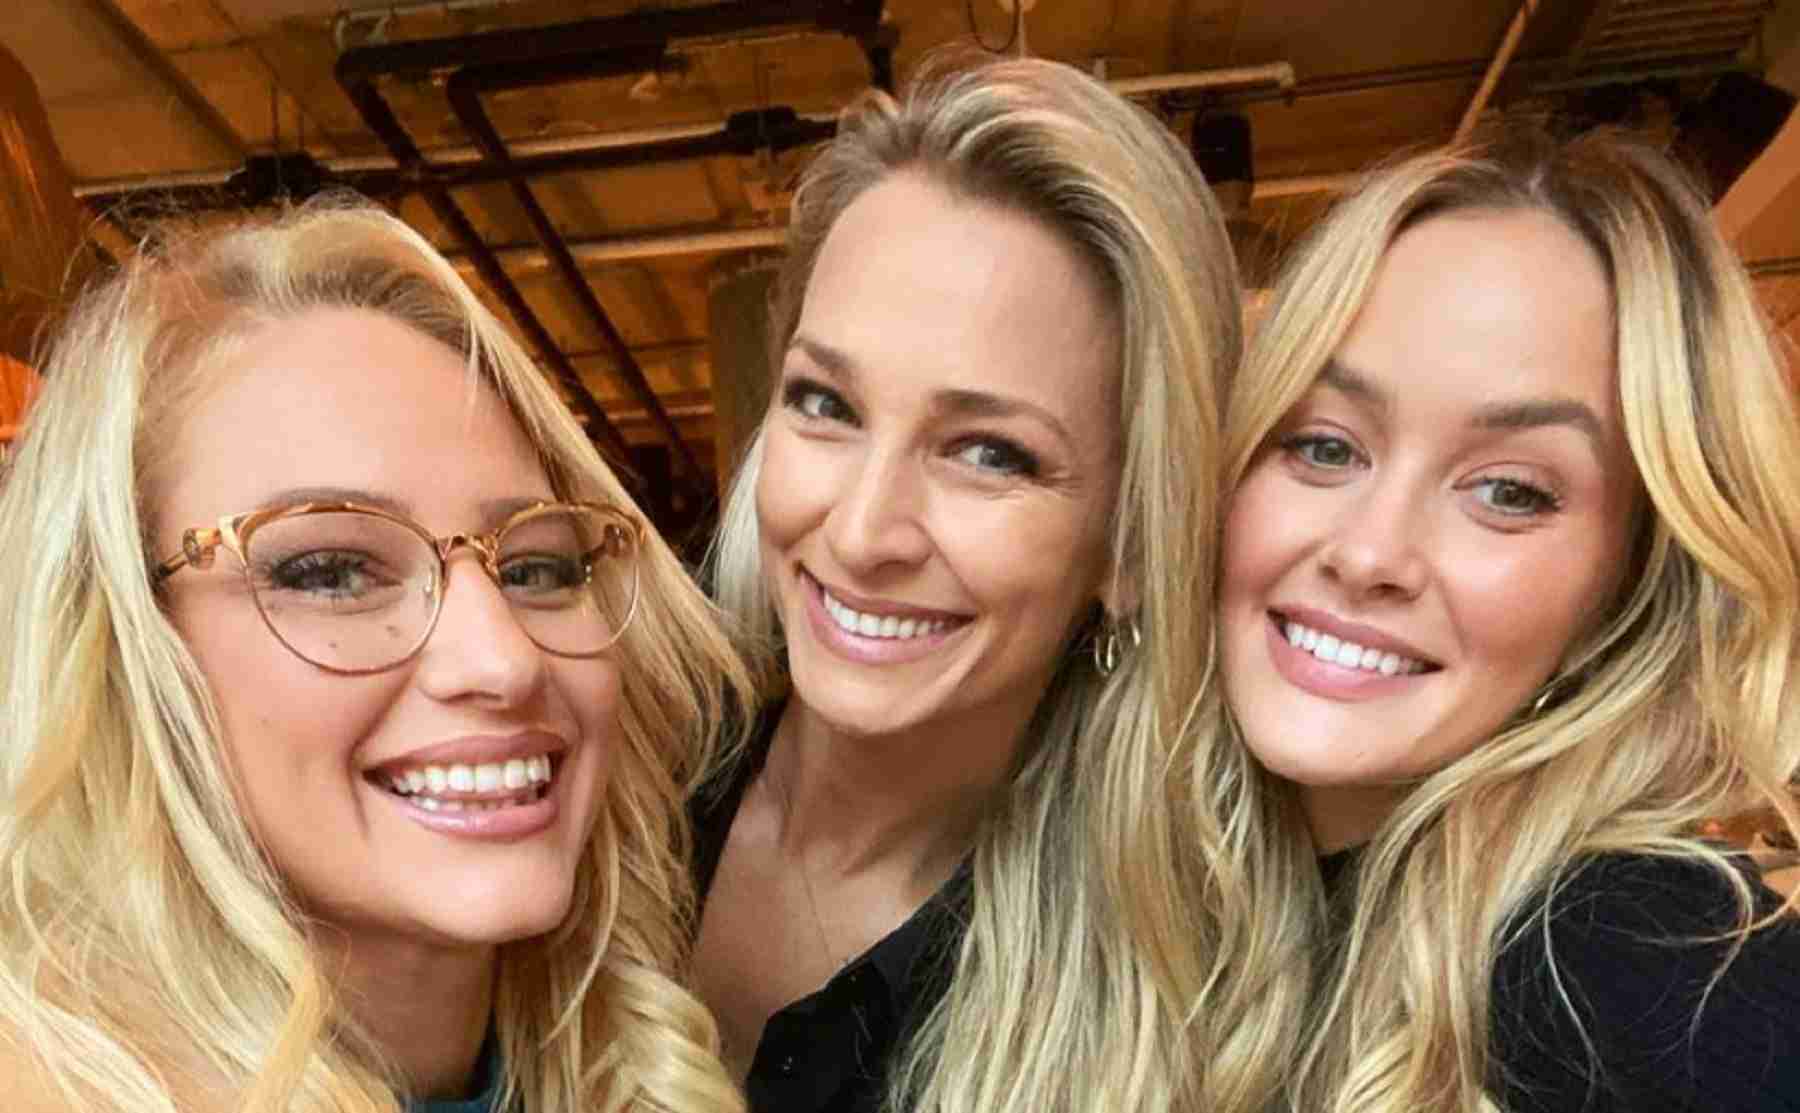 Blonde Bombshell Grabs Attention With Other Two Blondes